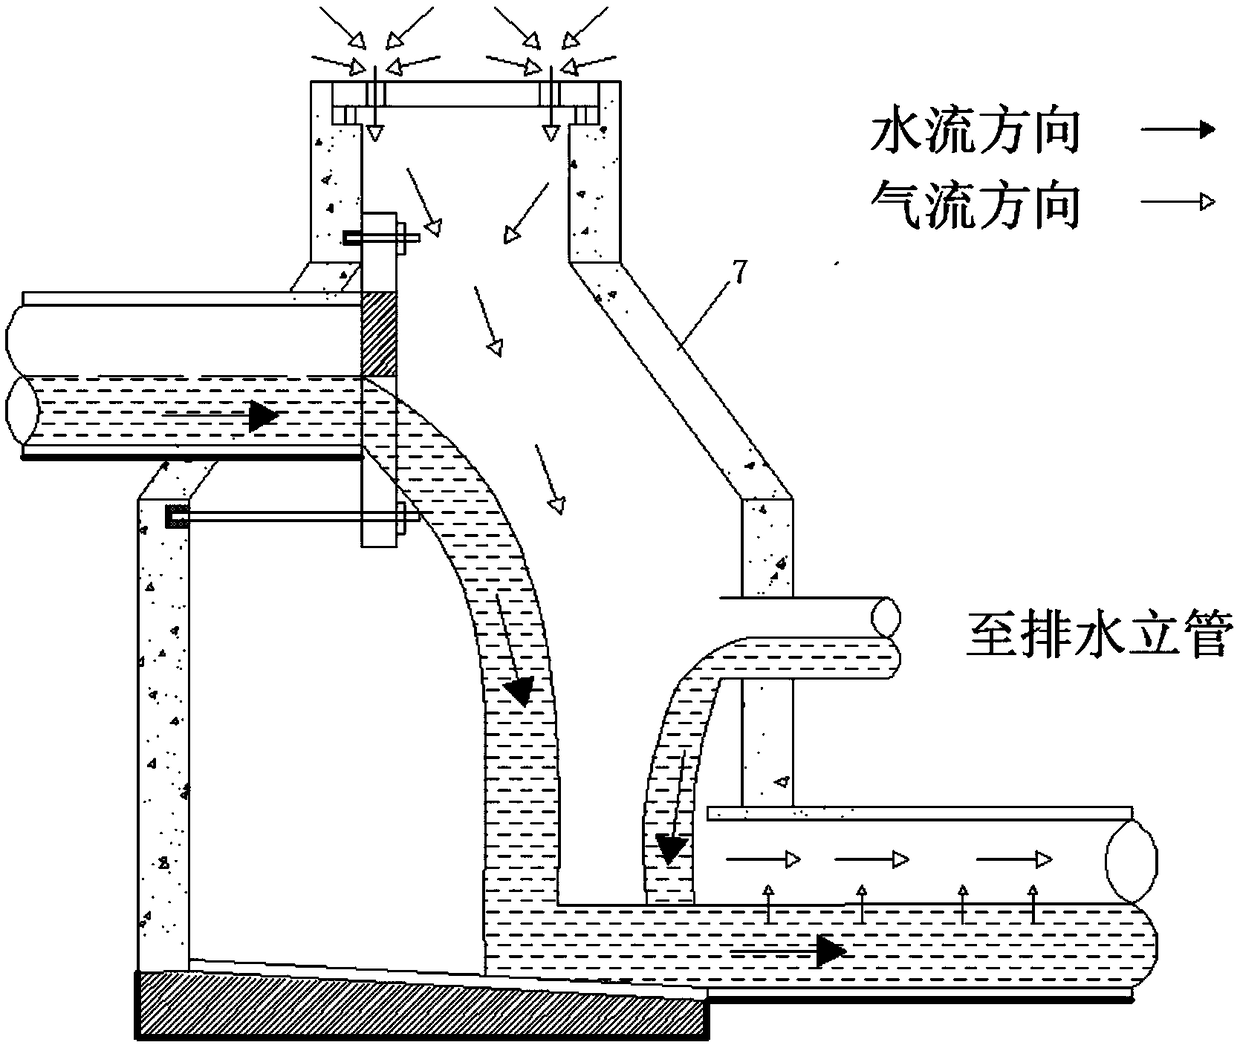 Device for organized gas removal through rain-sewage direct connection system